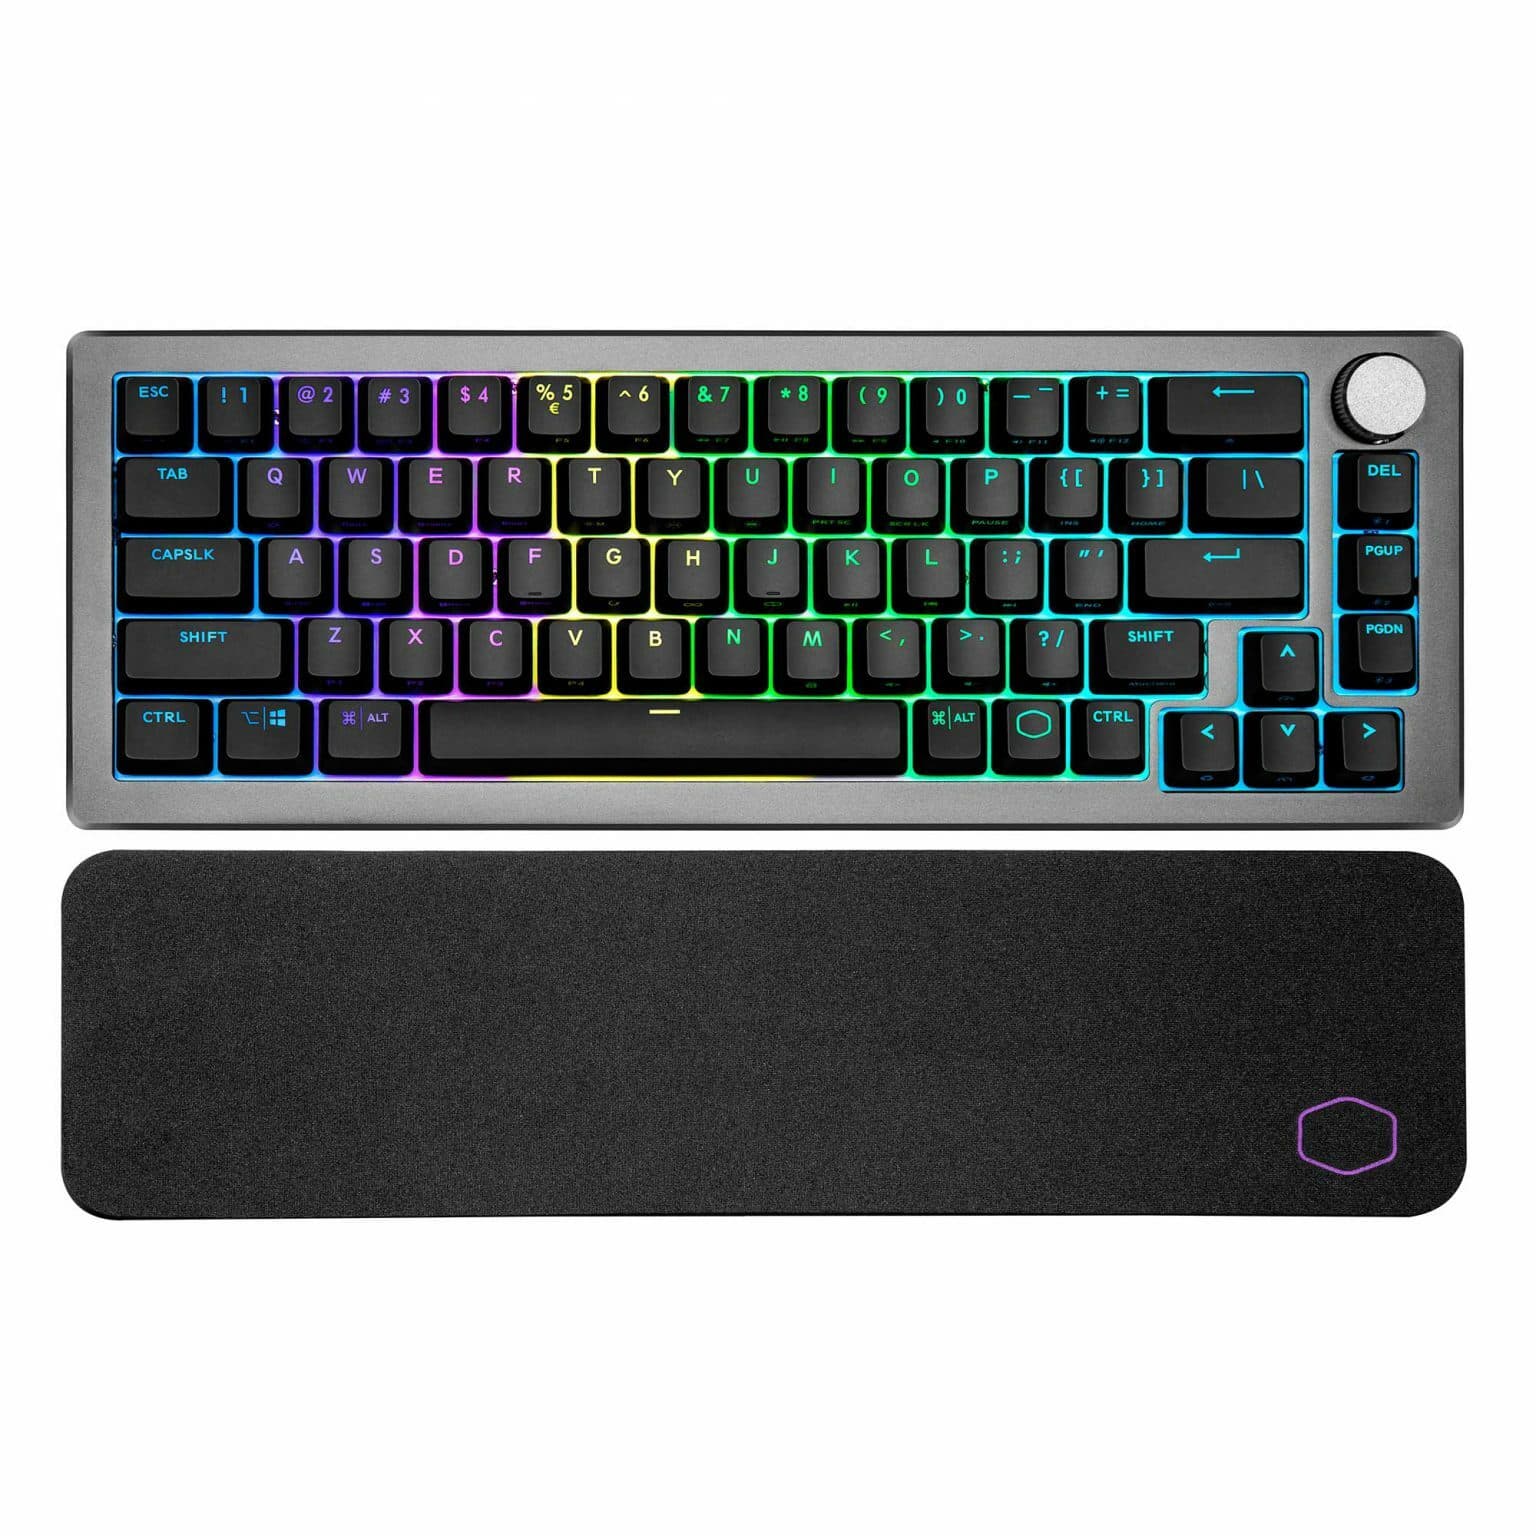 You can use Cooler Master's new 65% layout mechanical keyboard with PC or Mac.